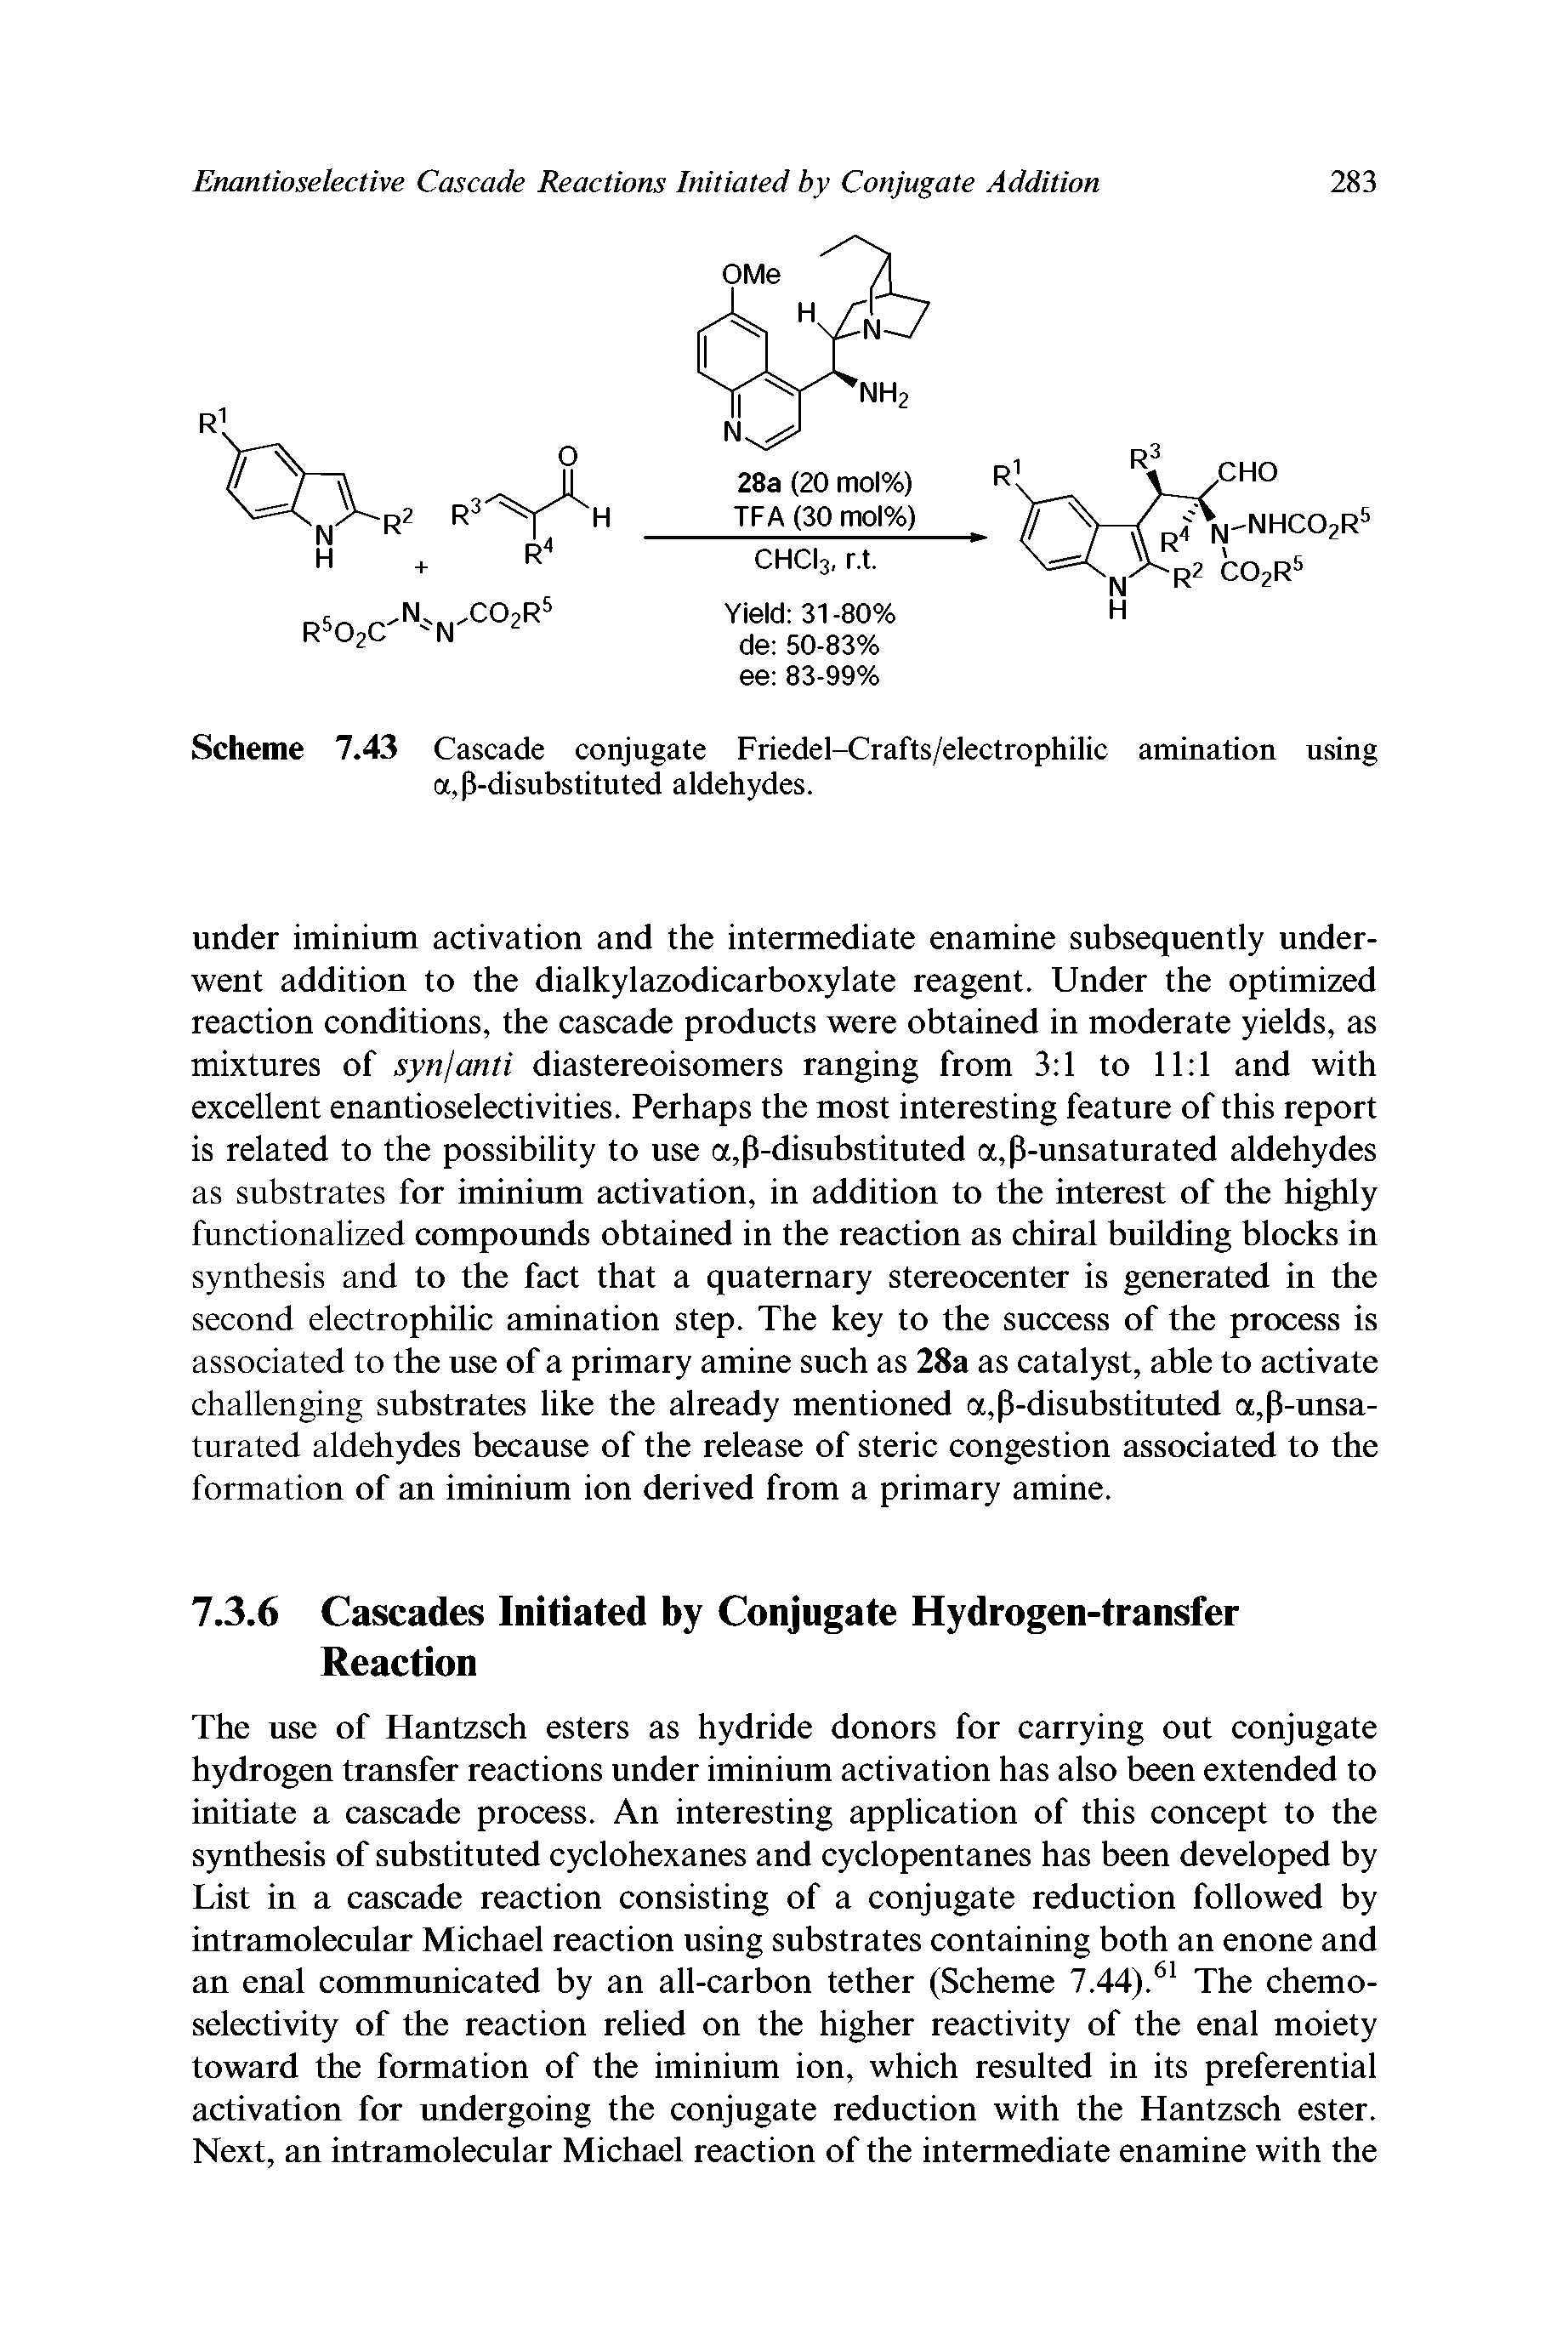 Scheme 7.43 Cascade conjugate Friedel-Crafts/electrophilic amination using a,P-disubstituted aldehydes.